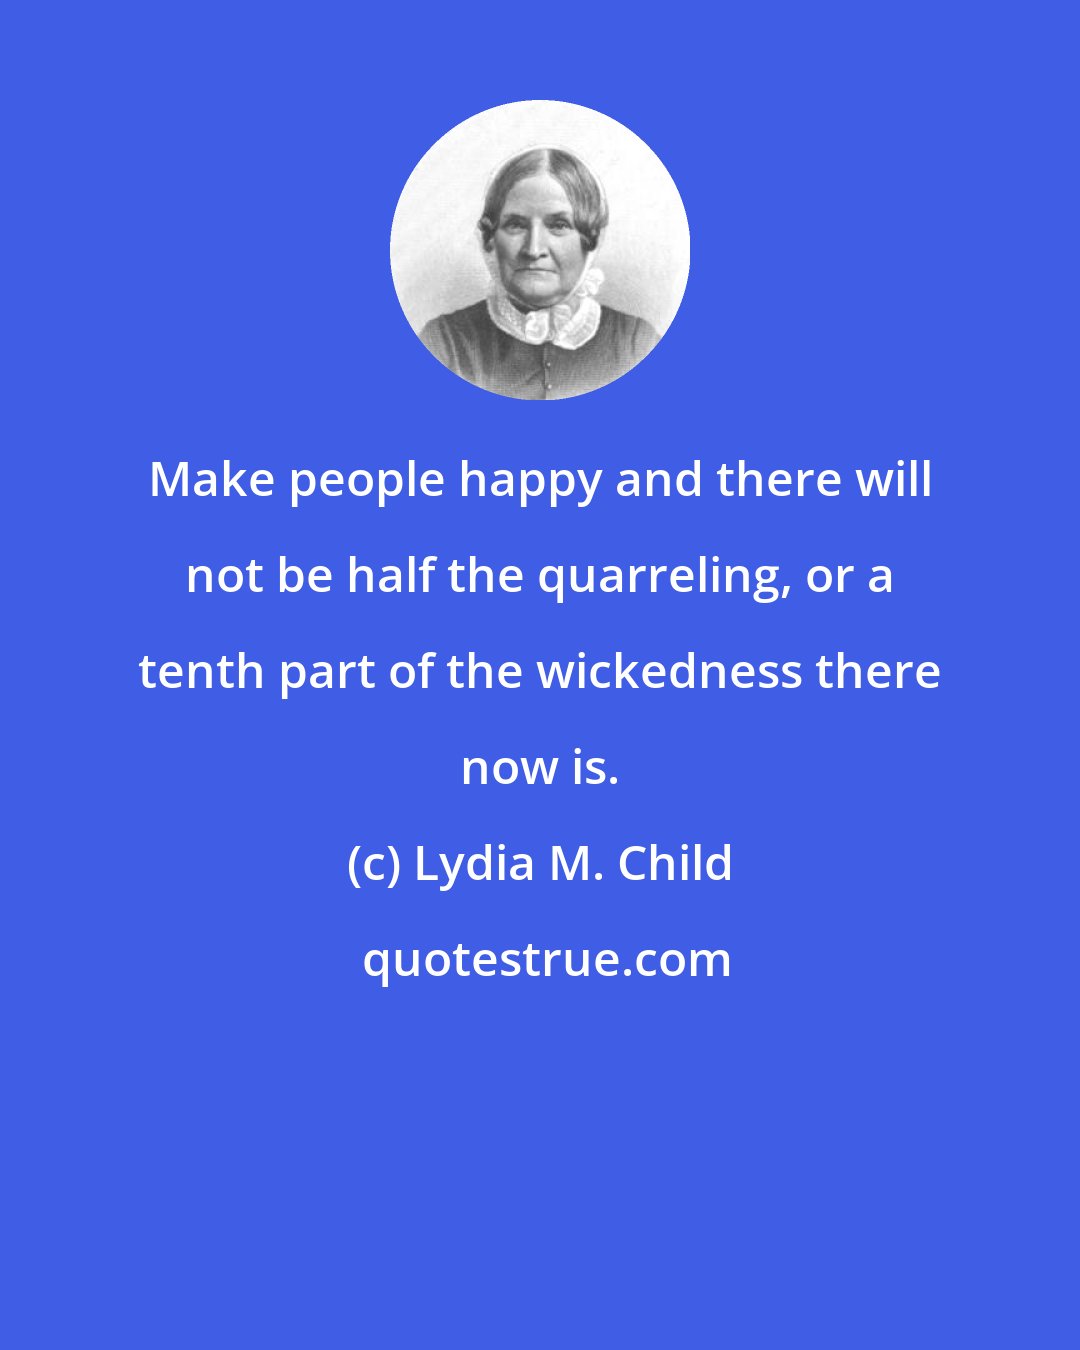 Lydia M. Child: Make people happy and there will not be half the quarreling, or a tenth part of the wickedness there now is.